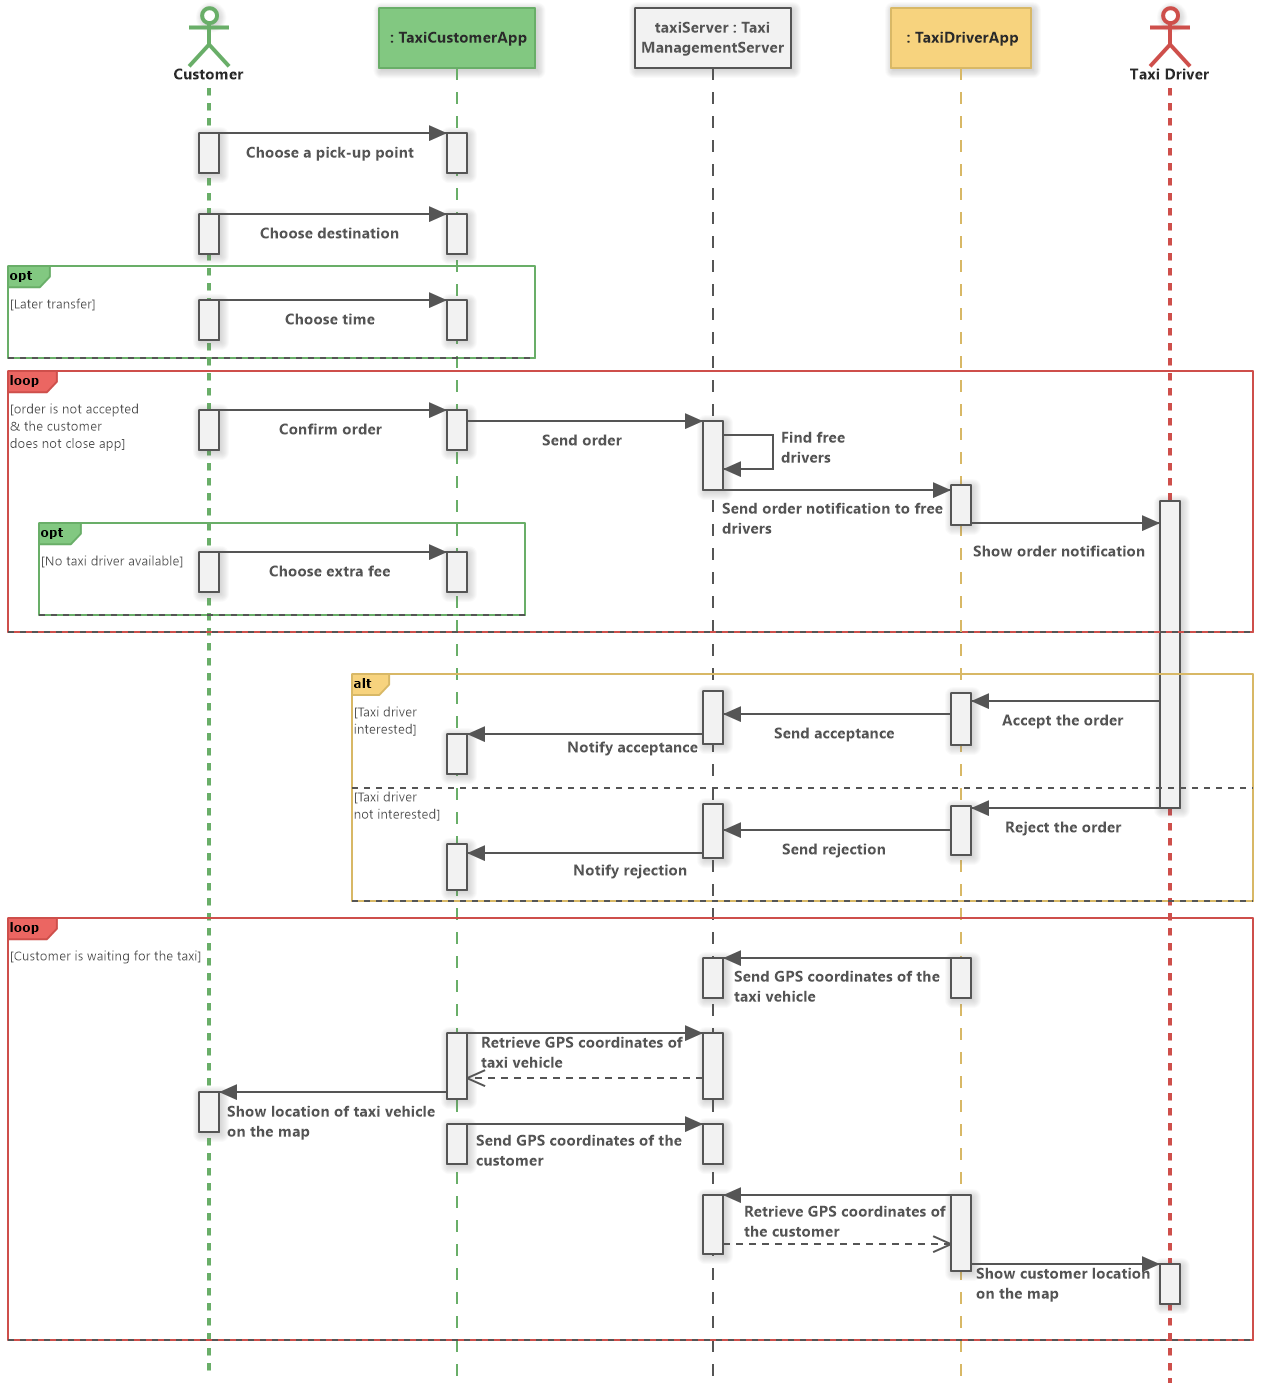 Taxi Booking System (UML Sequence Diagram)